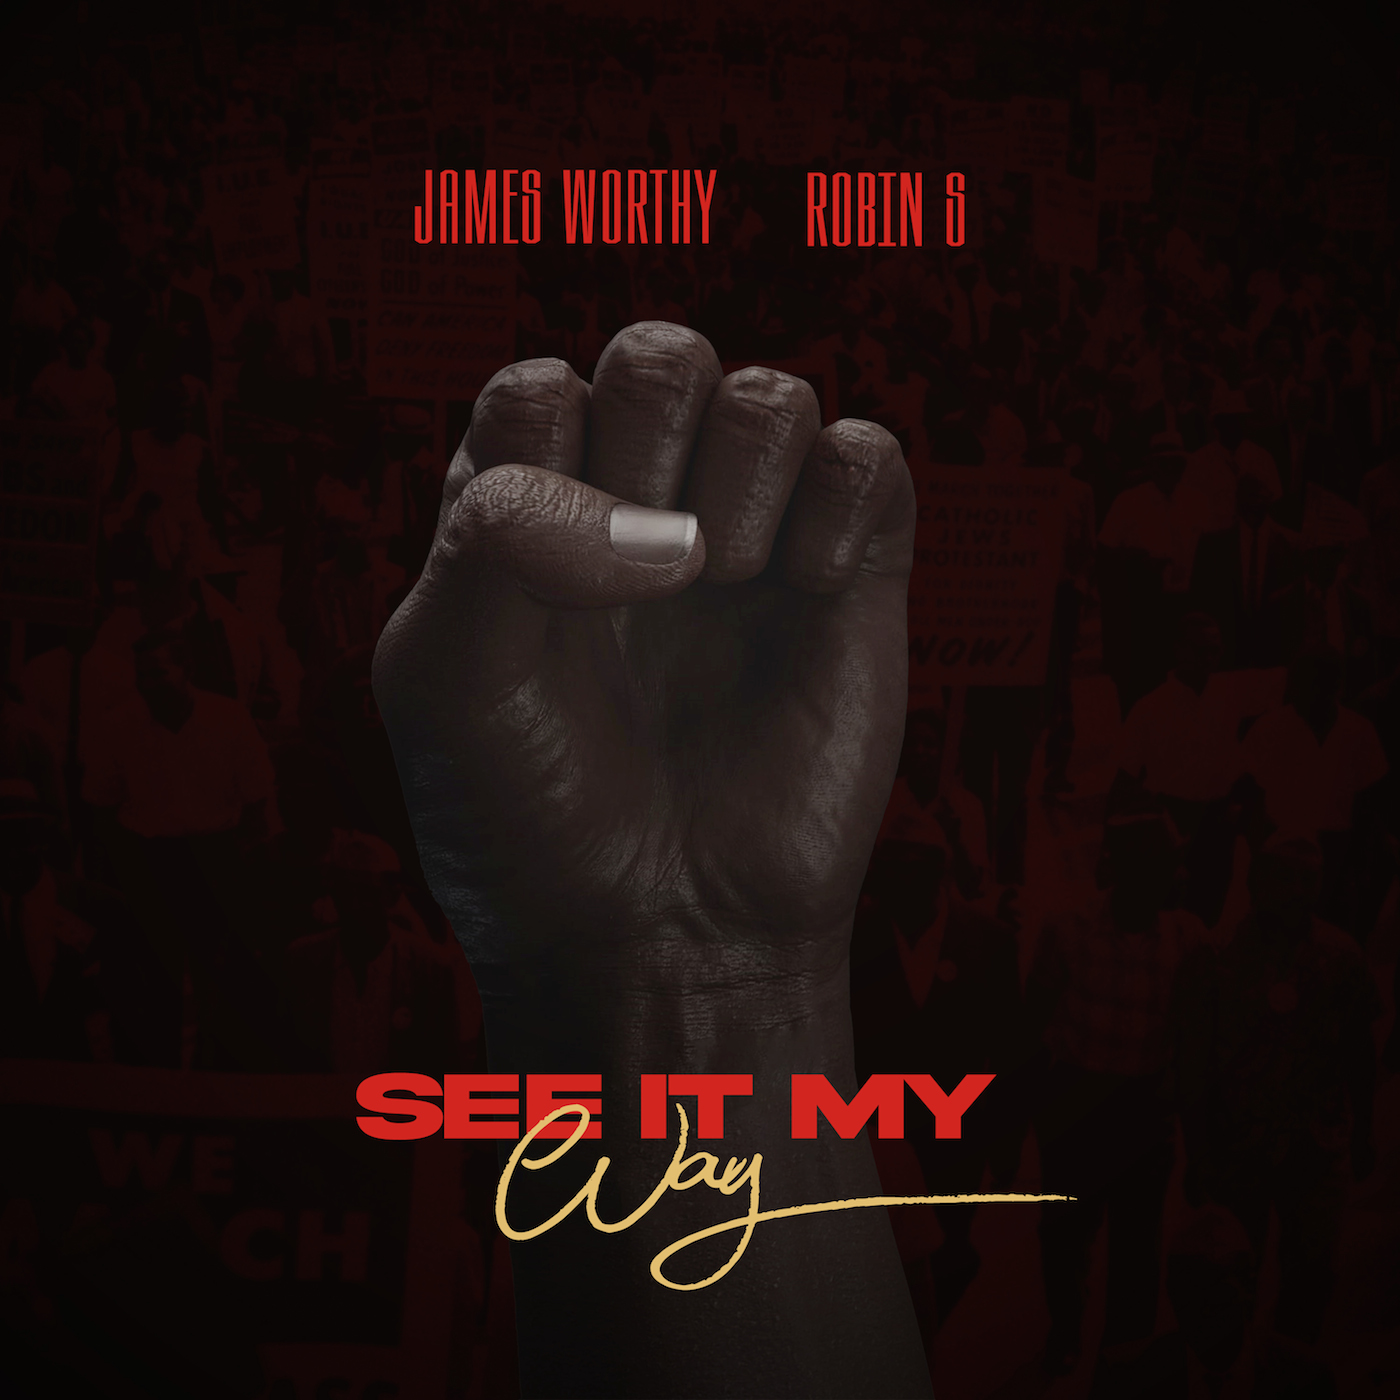 Prolific Singer/Songwriters James Worthy & Robin S Come Together With Powerful New Single “See It My Way” For BLACK HISTORY MONTH